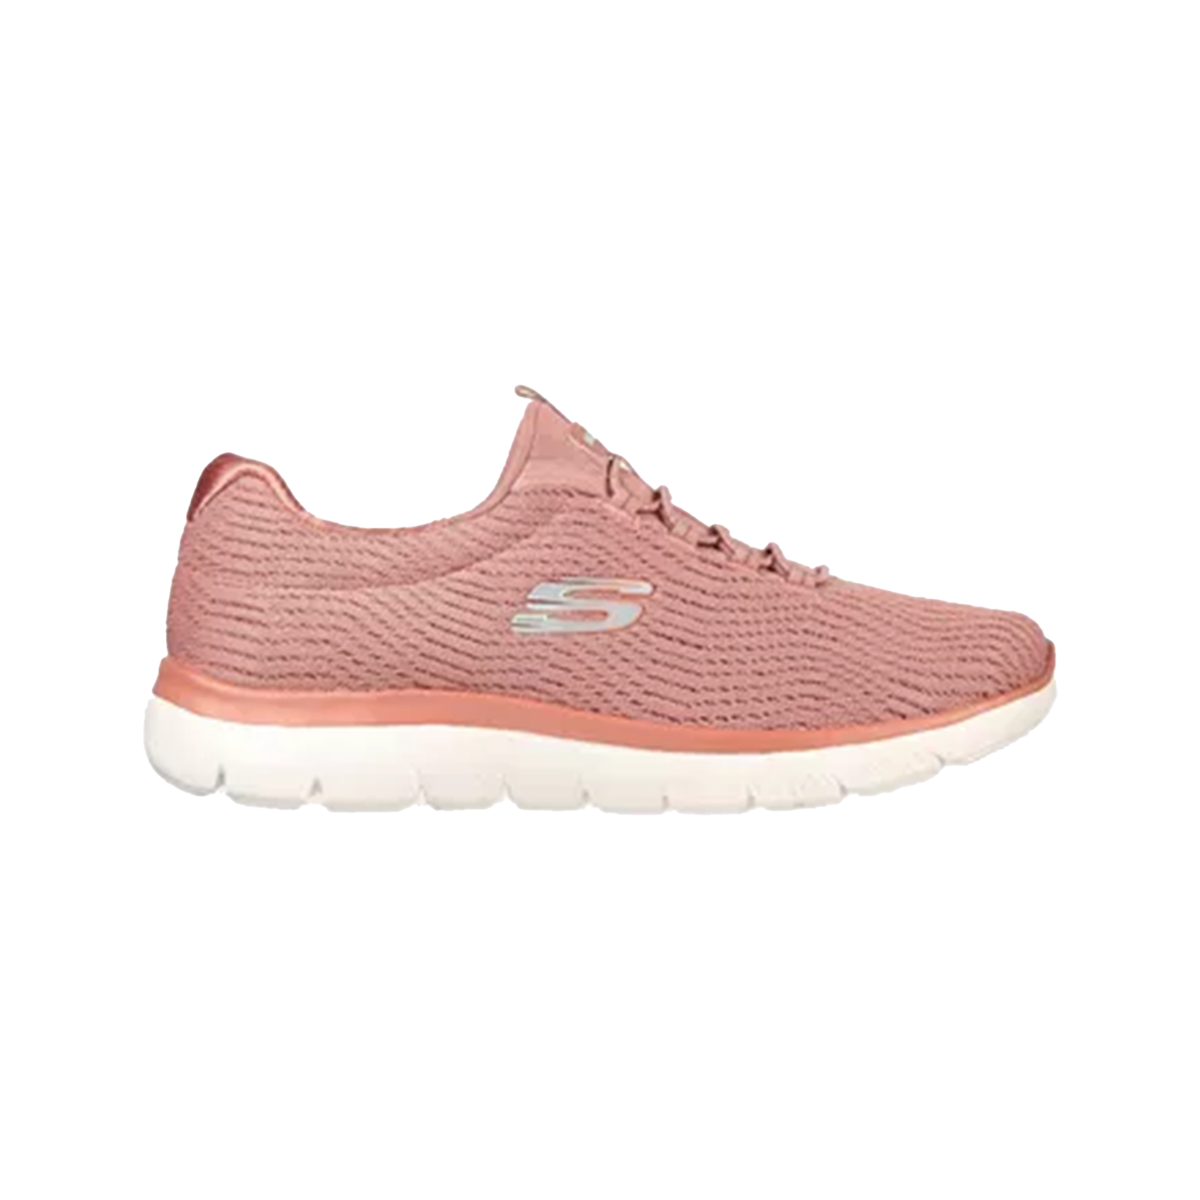 Skechers Summits Next Wave Shoes For Women, Dark Rose